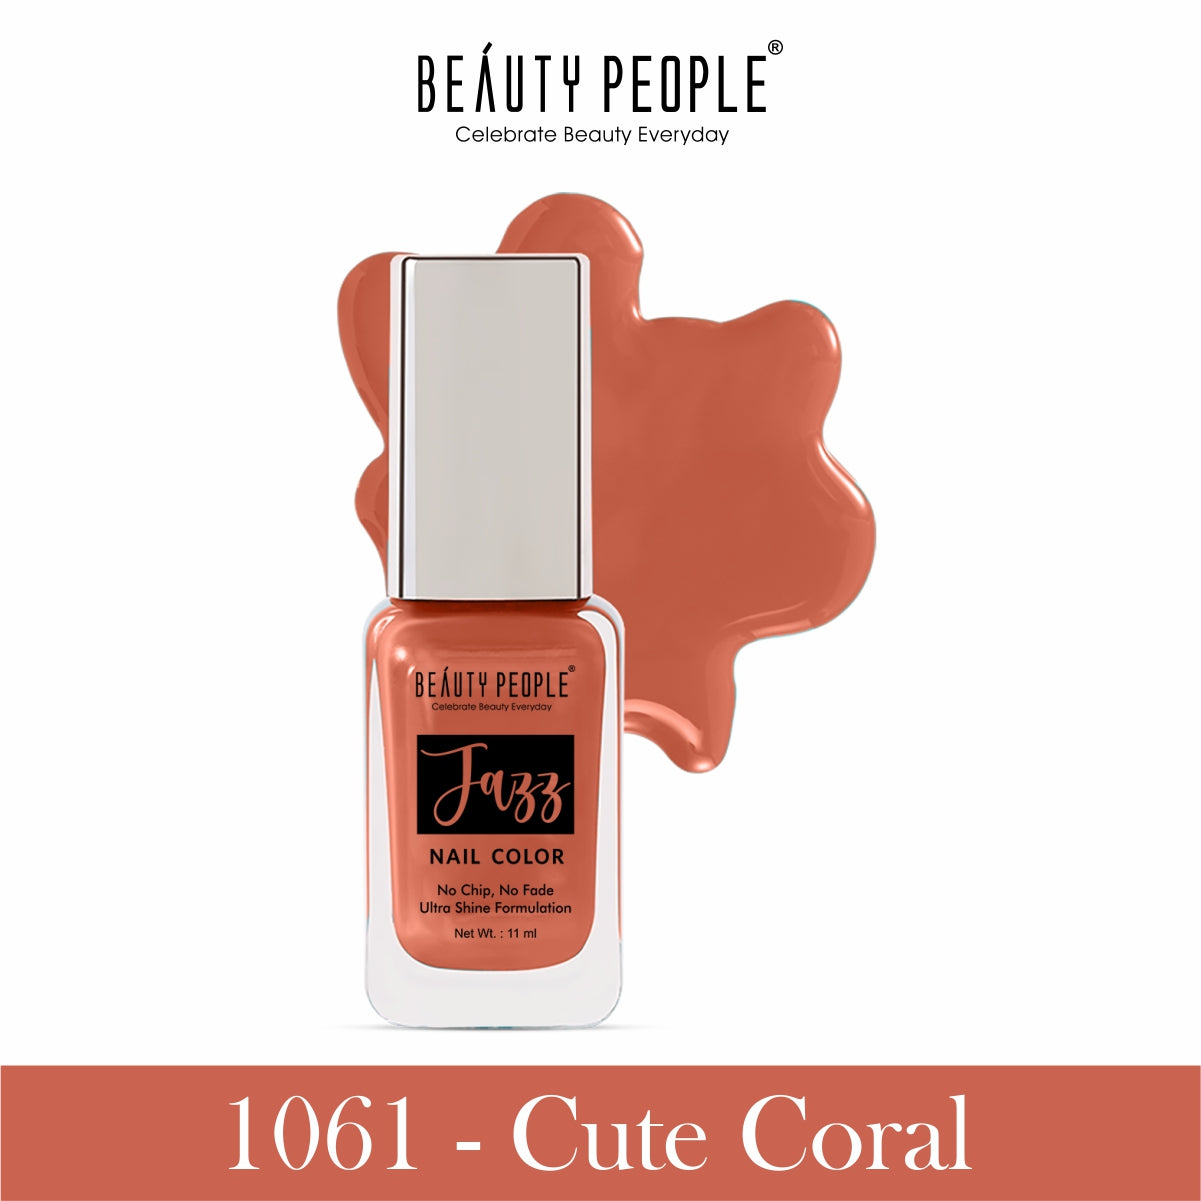 Cute Nail Colors: What Nail Polish Color Should I Choose Today? - Get Your  Pretty On®